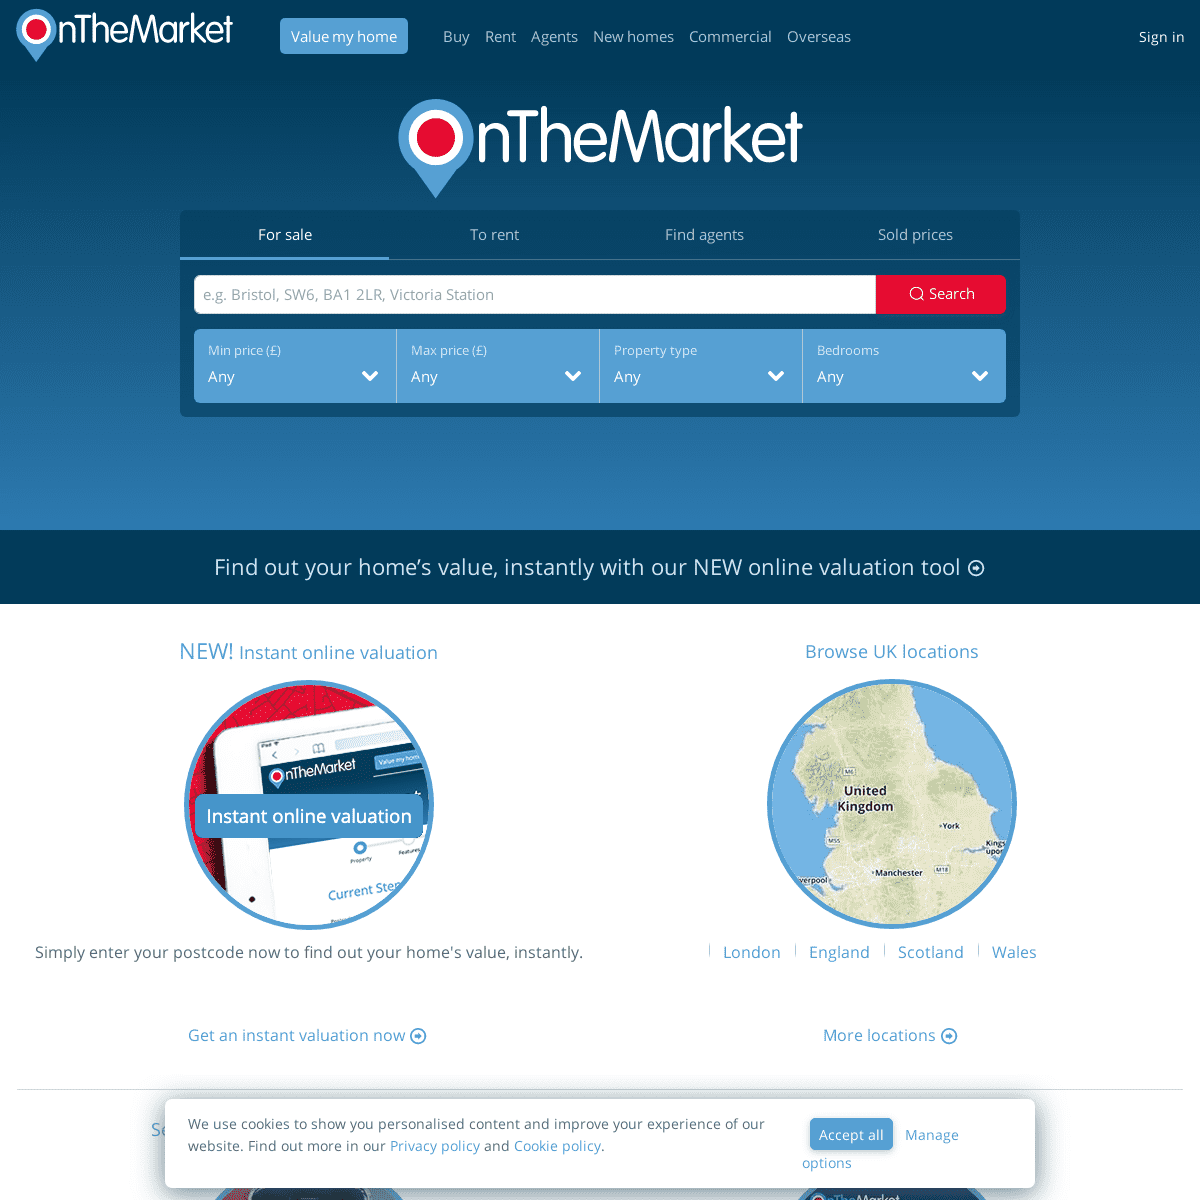 A complete backup of https://onthemarket.com